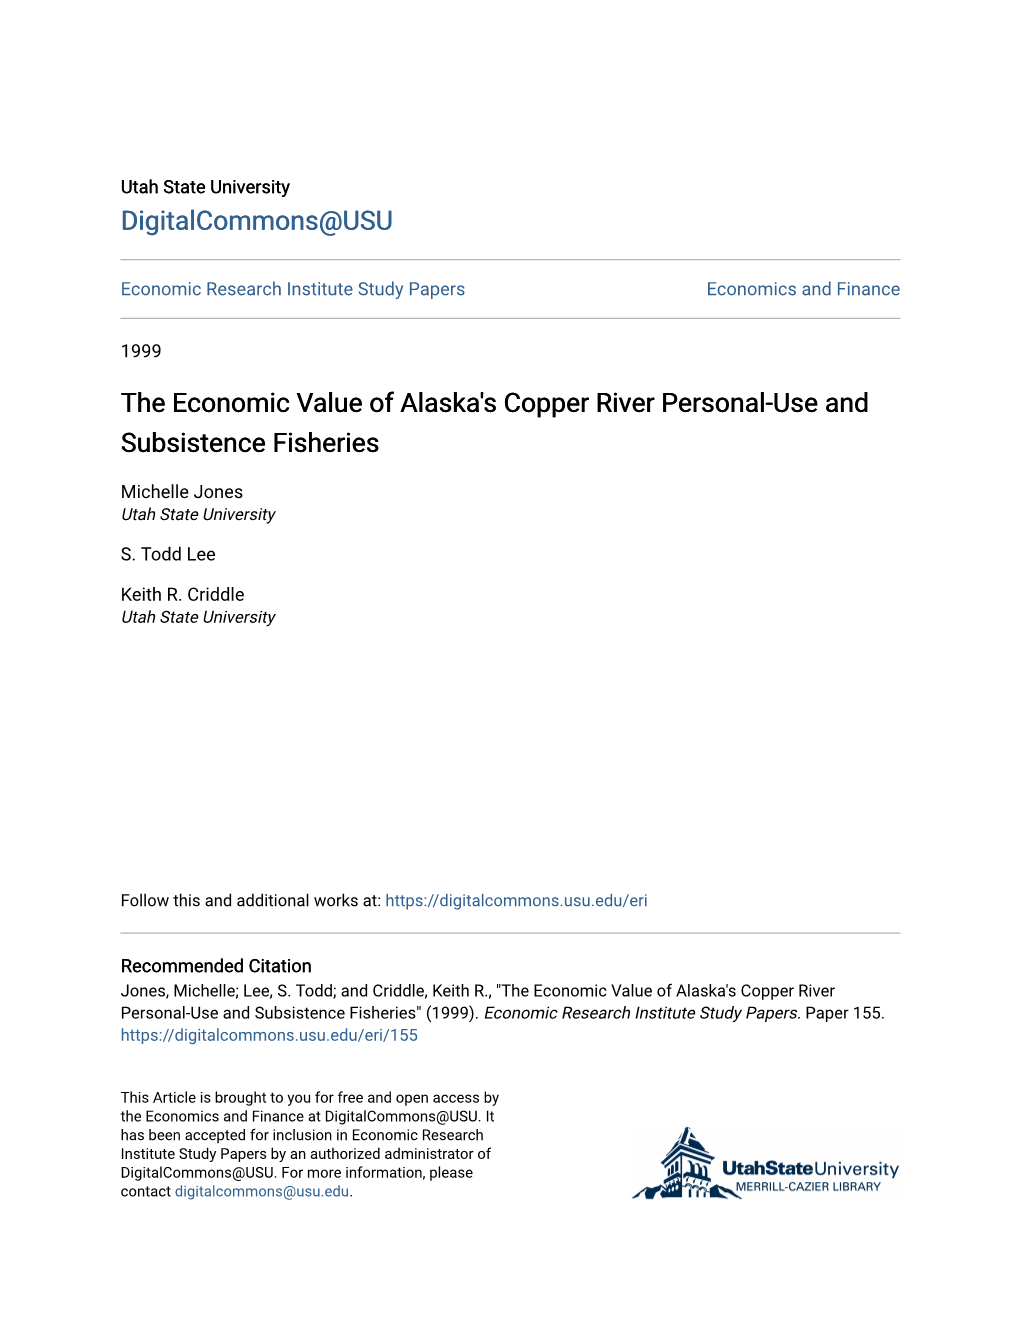 The Economic Value of Alaska's Copper River Personal-Use and Subsistence Fisheries